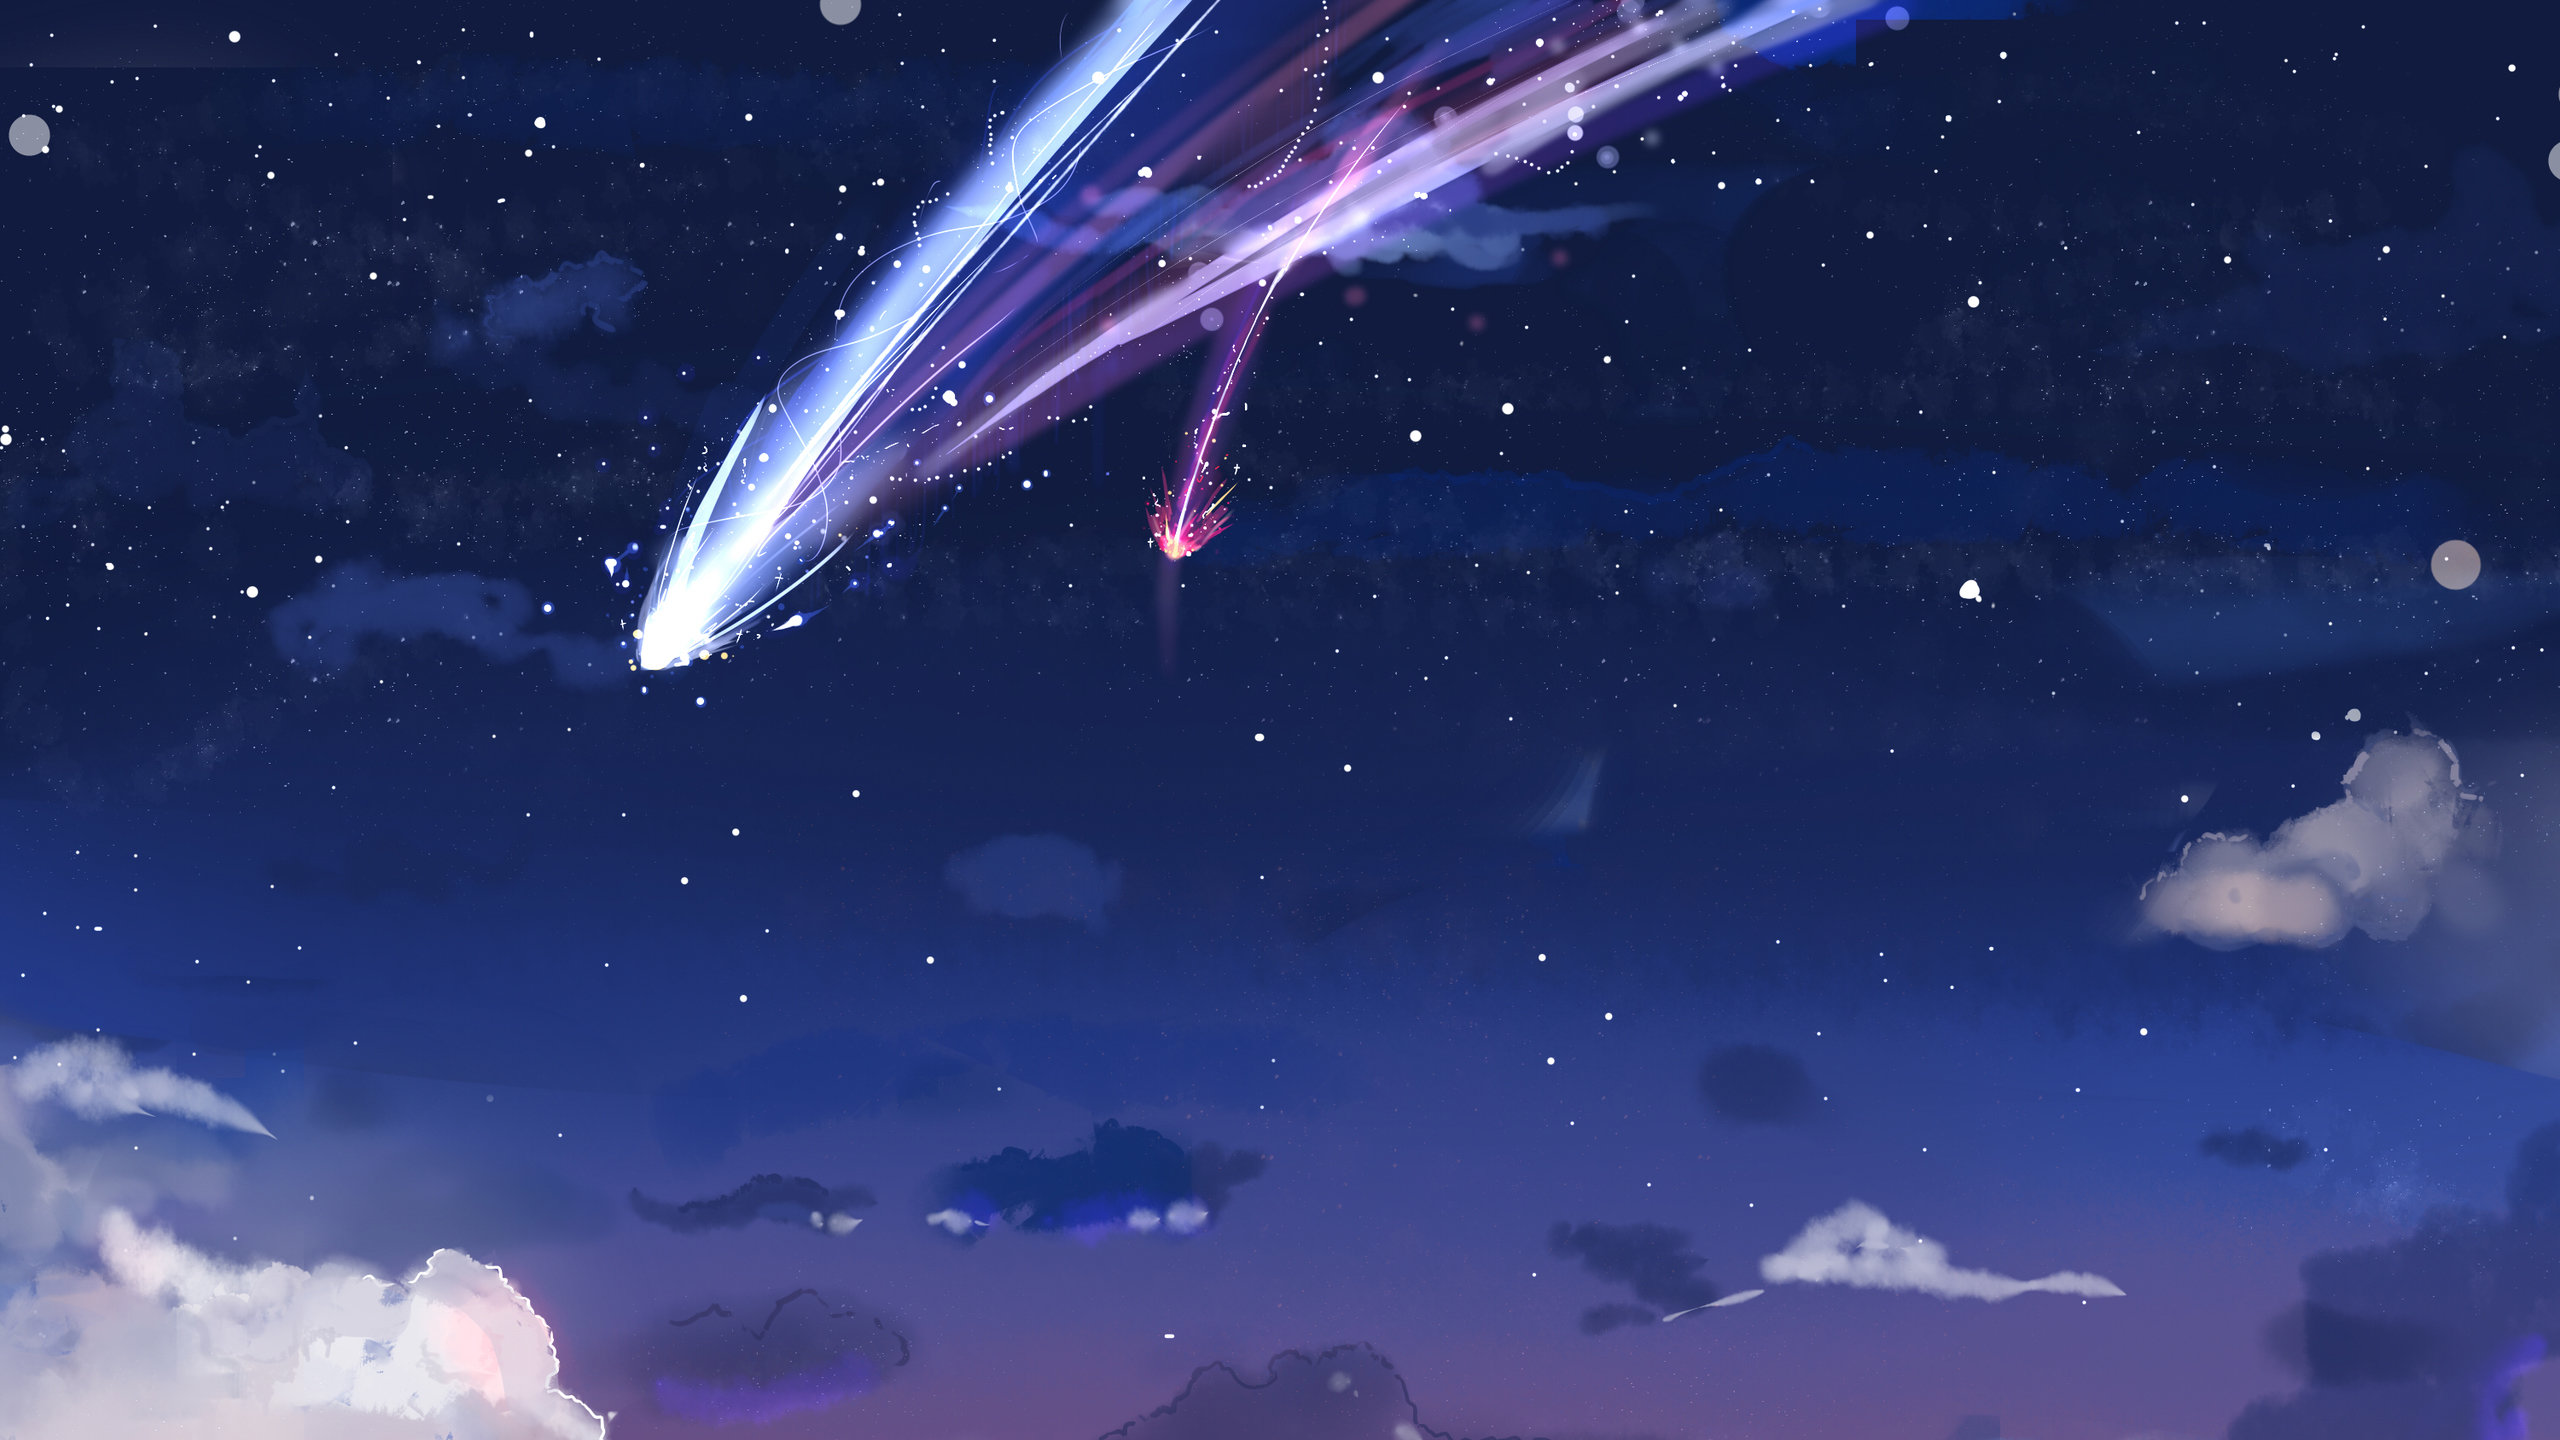 Awesome Your Name Free Wallpaper Id For Hd 2560x1440 Pc